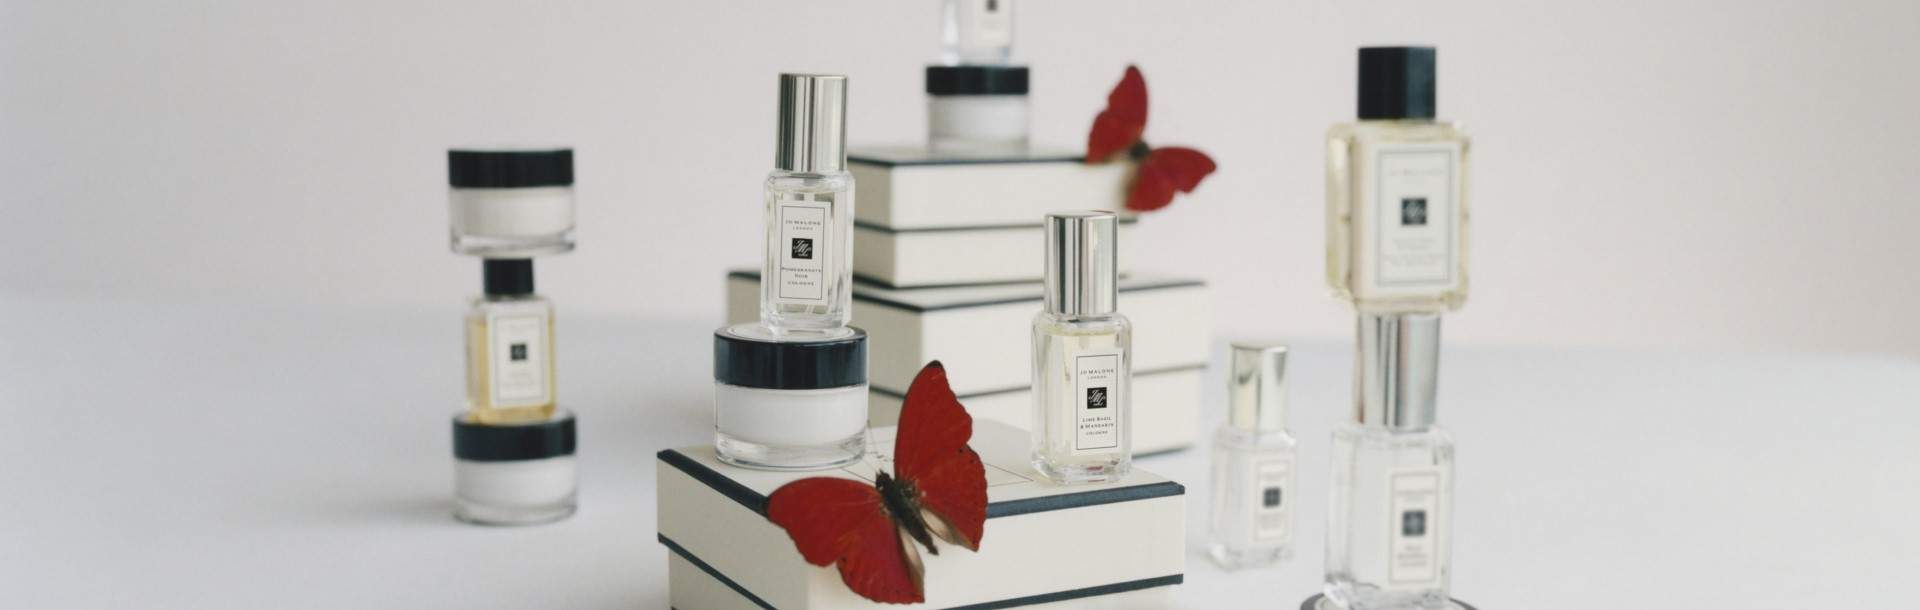 Jo Malone London gift boxes and miniature colognes and body cremes on a table with butterflies